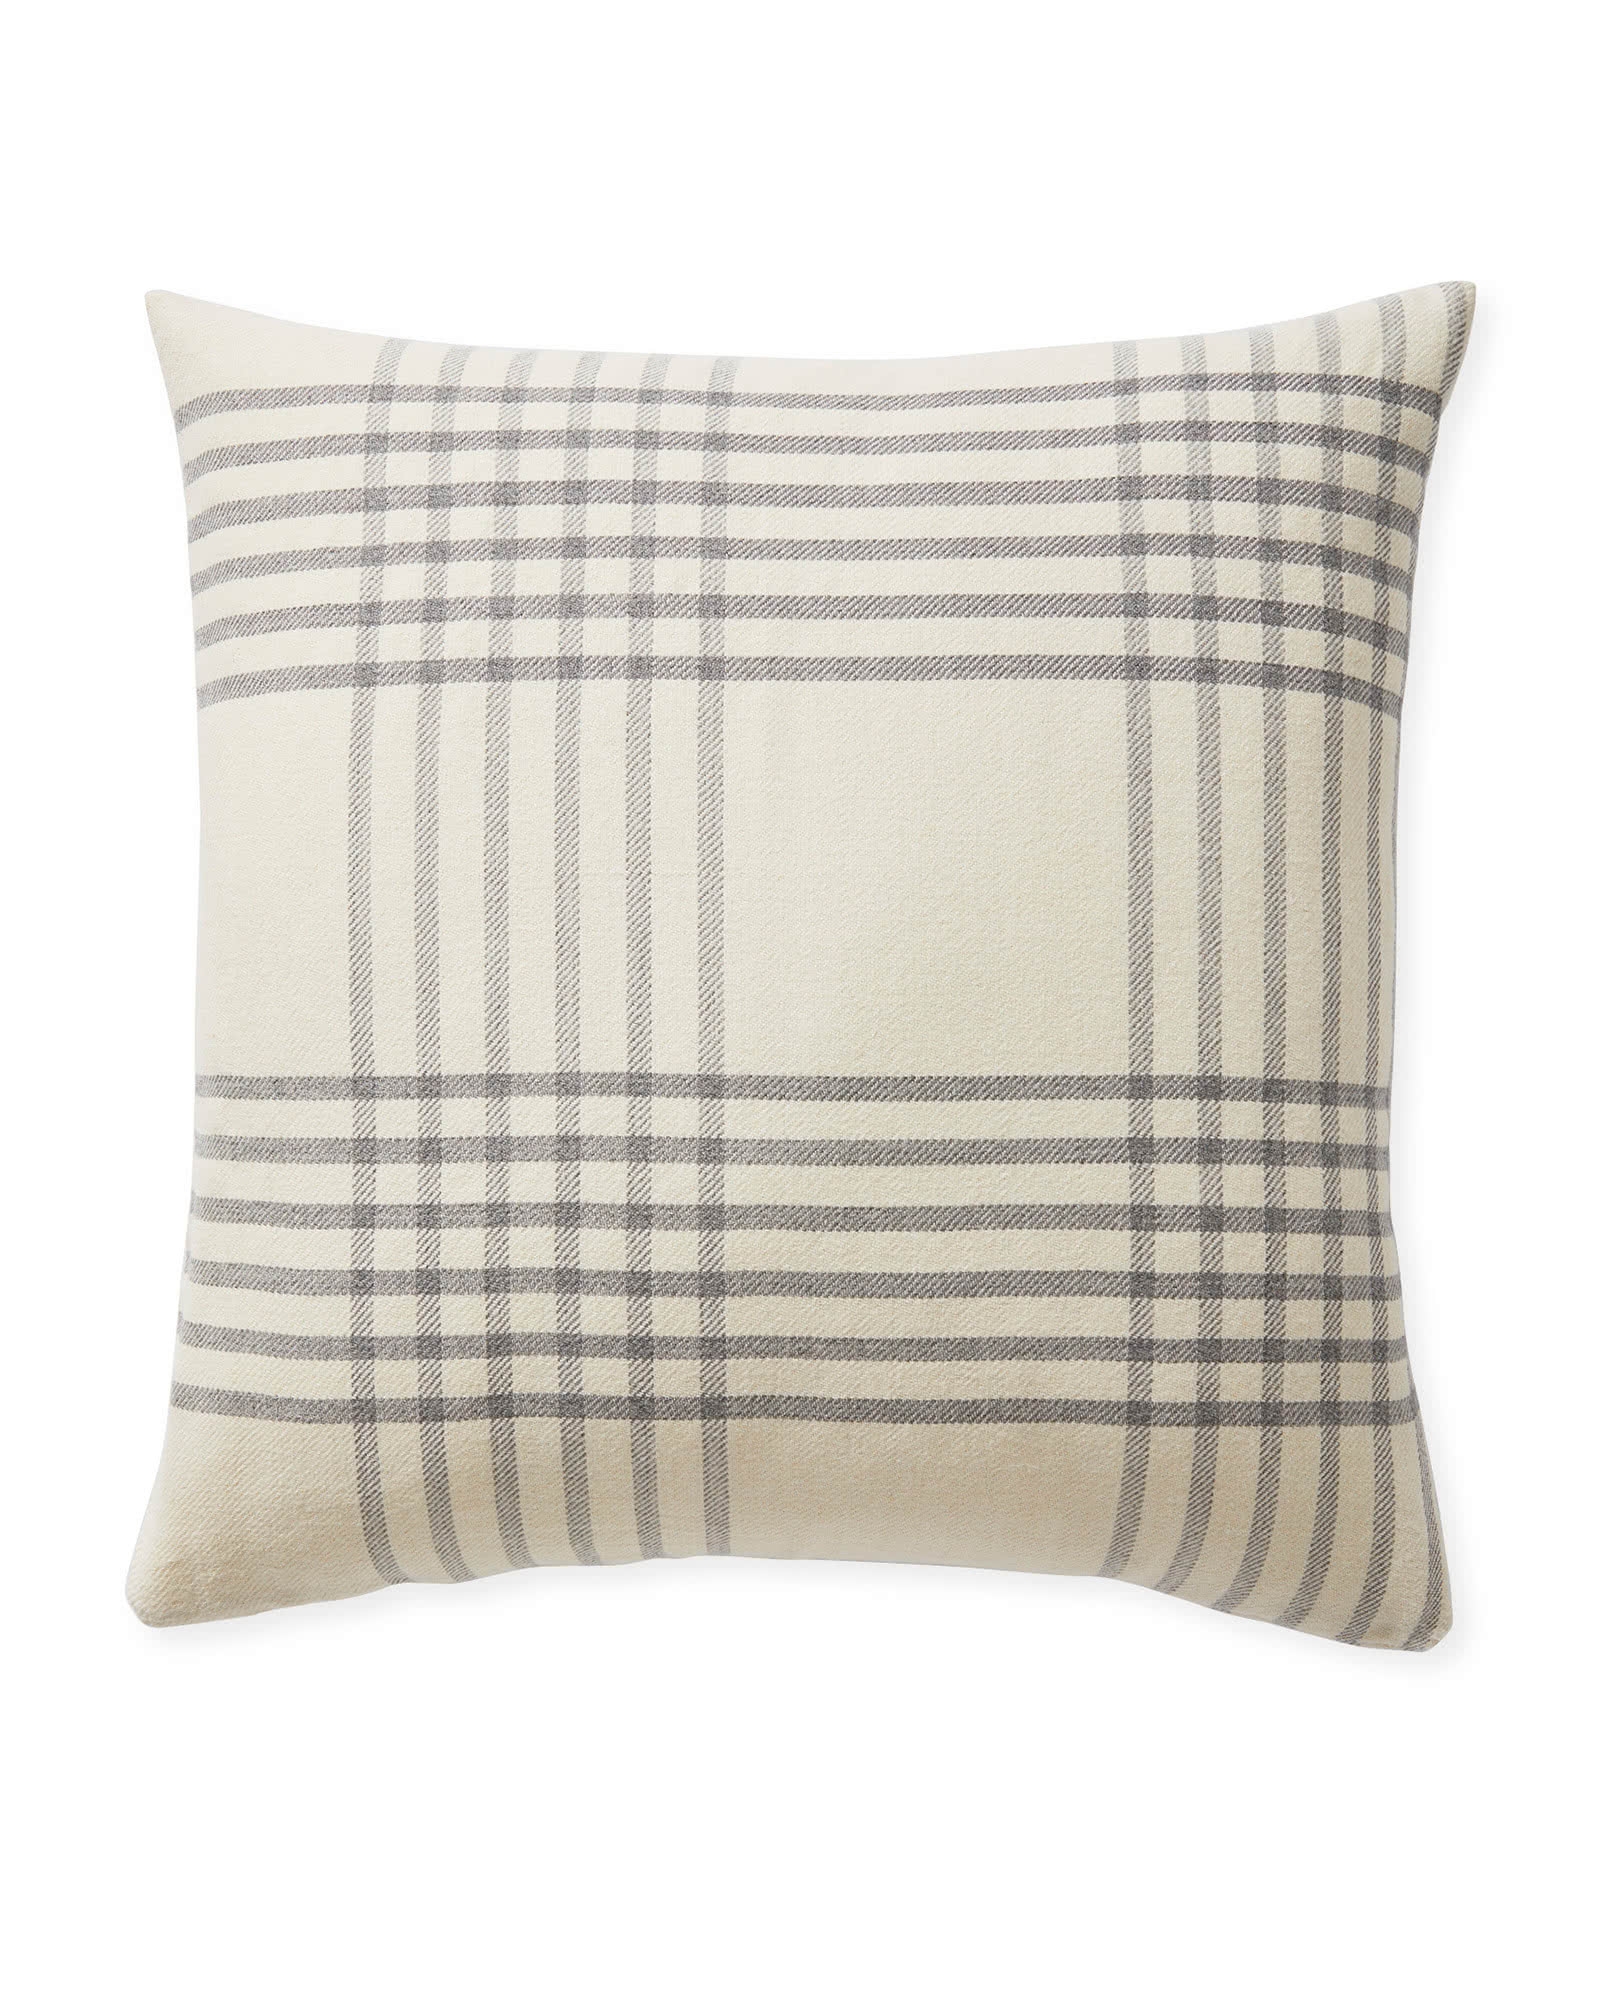 Blakely Plaid 24"SQ. Pillow Cover - Ivory/Grey - Insert sold separately - Image 0